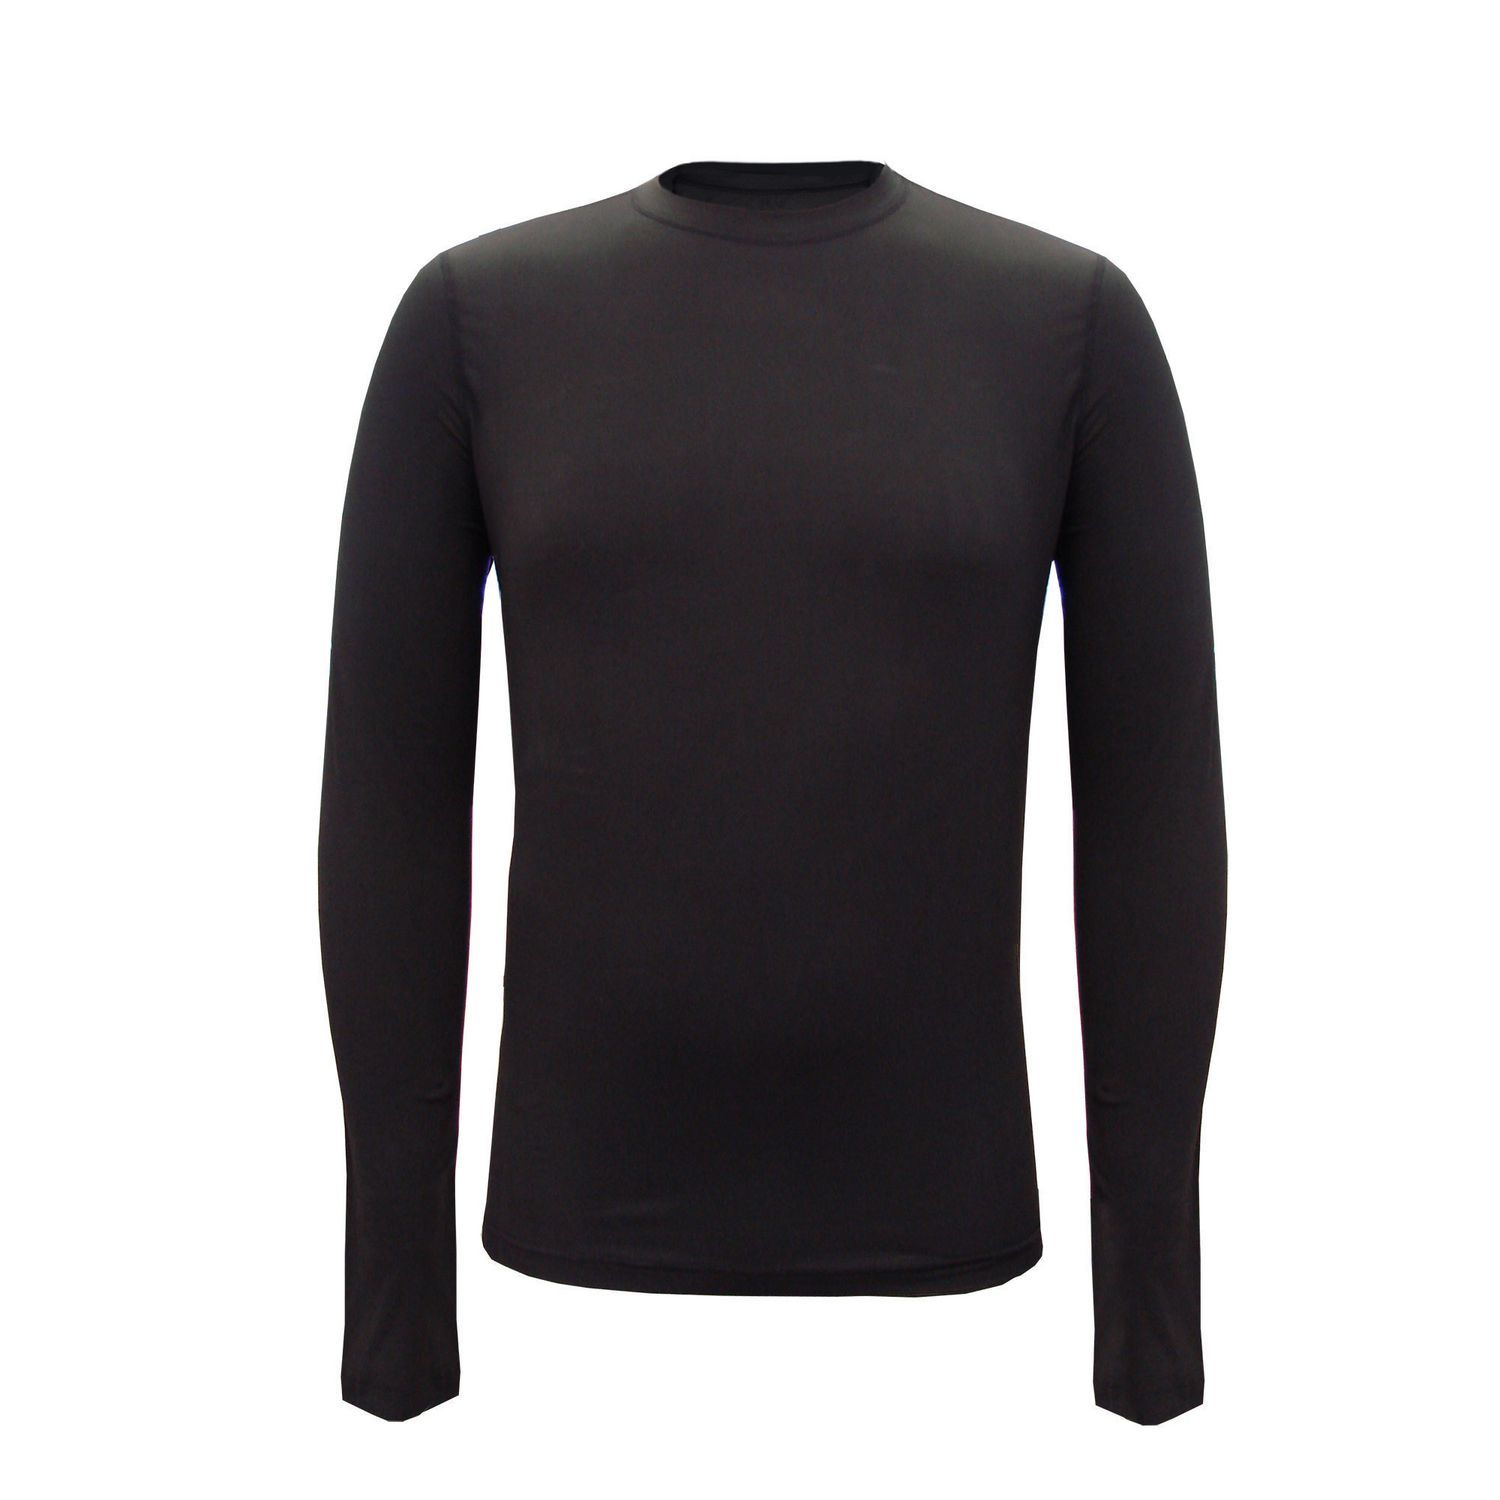 Athletic Works Men's Long Sleeve Crew Neck Thermal Shirt | Walmart Canada